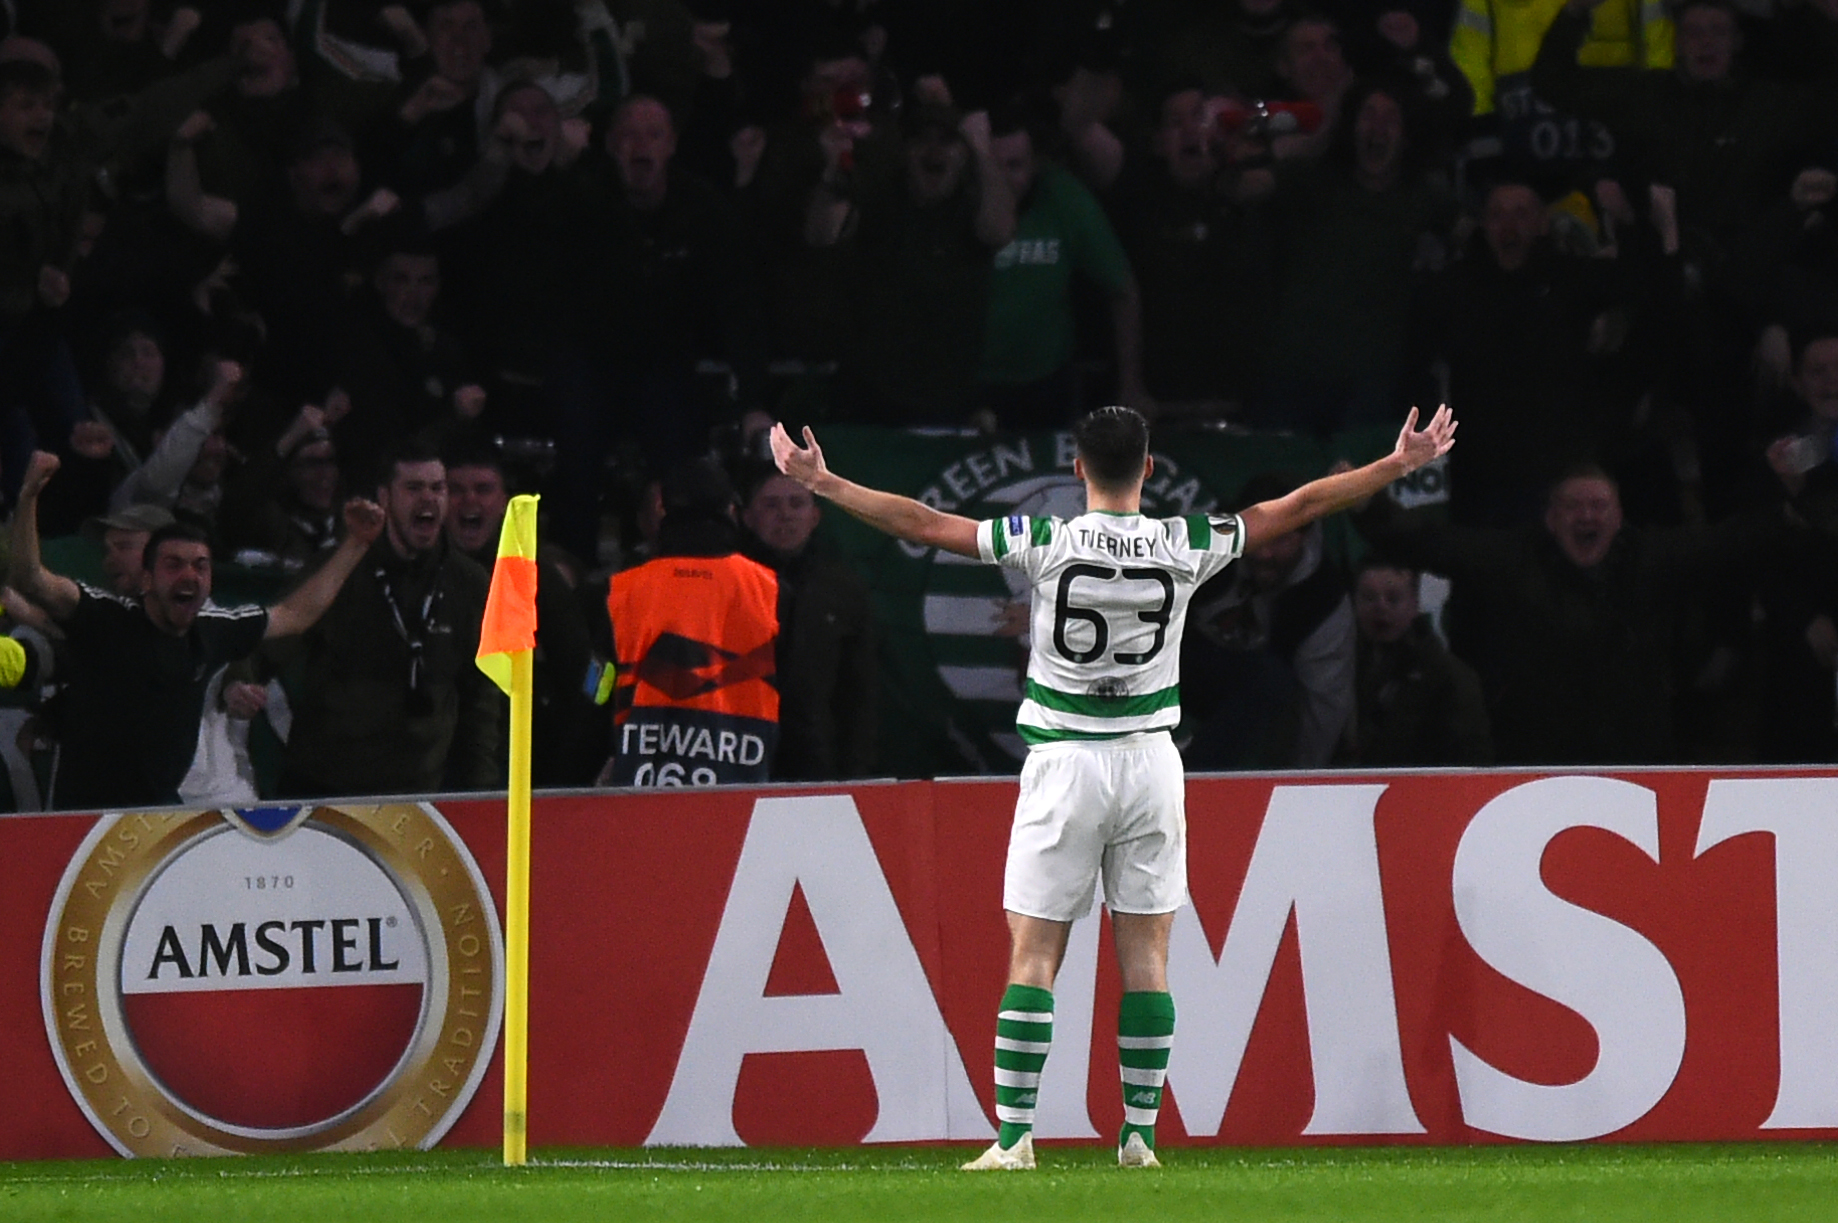 Celtic's Scottish defender Kieran Tierney celebrates after scoring during a UEFA Europa league group stage football match between Celtic and Liepzig at Celtic Park stadium in Glasgow, Scotland on November 8, 2018. (Photo by ANDY BUCHANAN / AFP)        (Photo credit should read ANDY BUCHANAN/AFP/Getty Images)